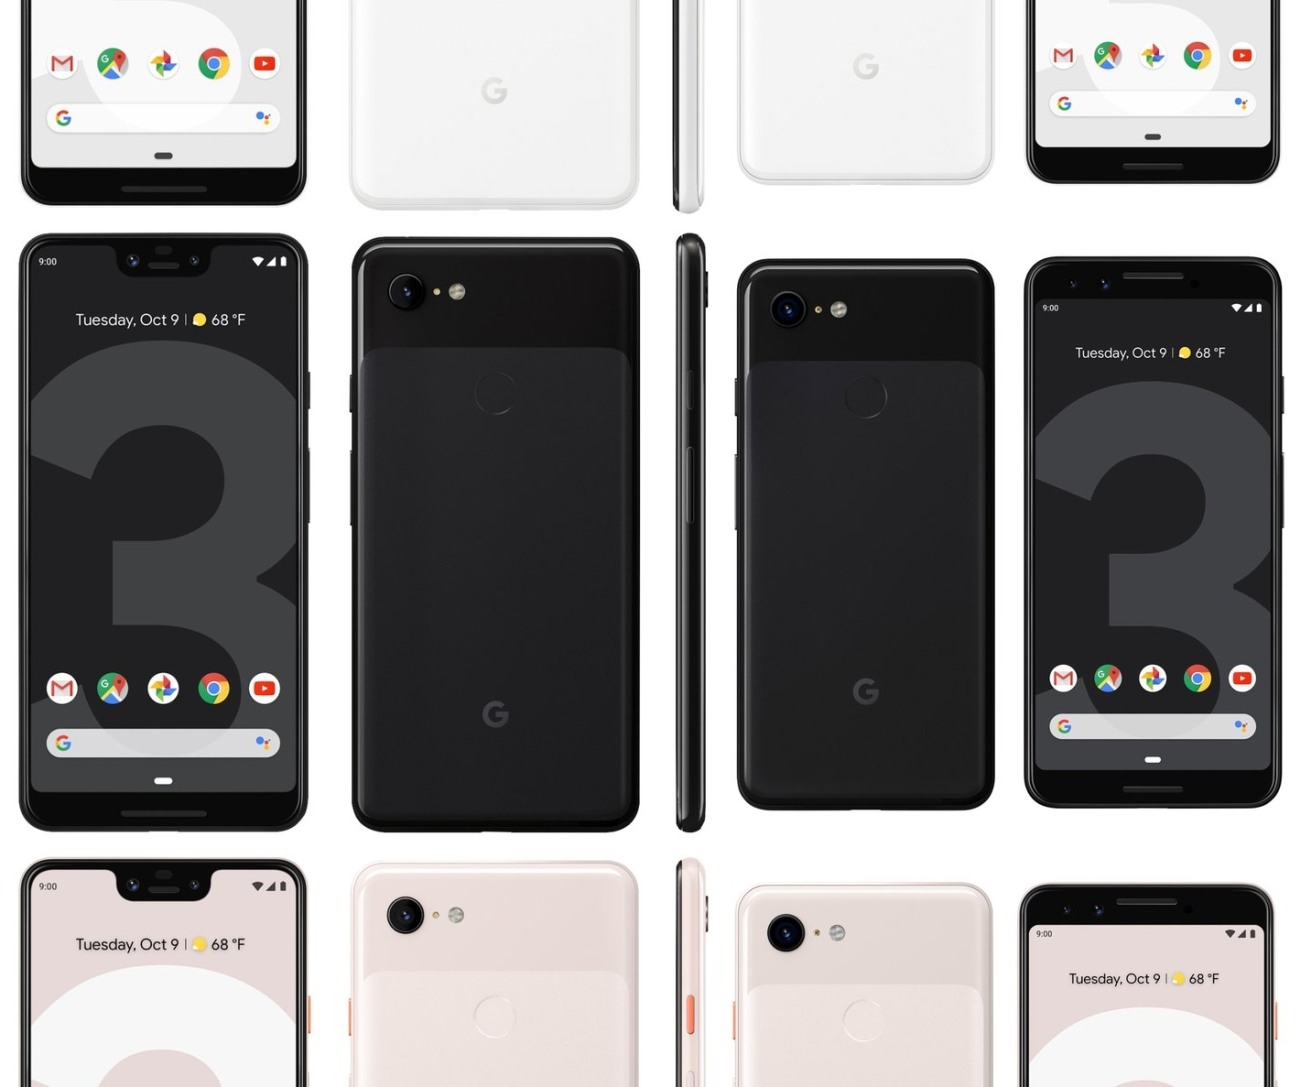 Pixel 3, Pixel 3 XL pictures leak for what might be the last time | DeviceDaily.com